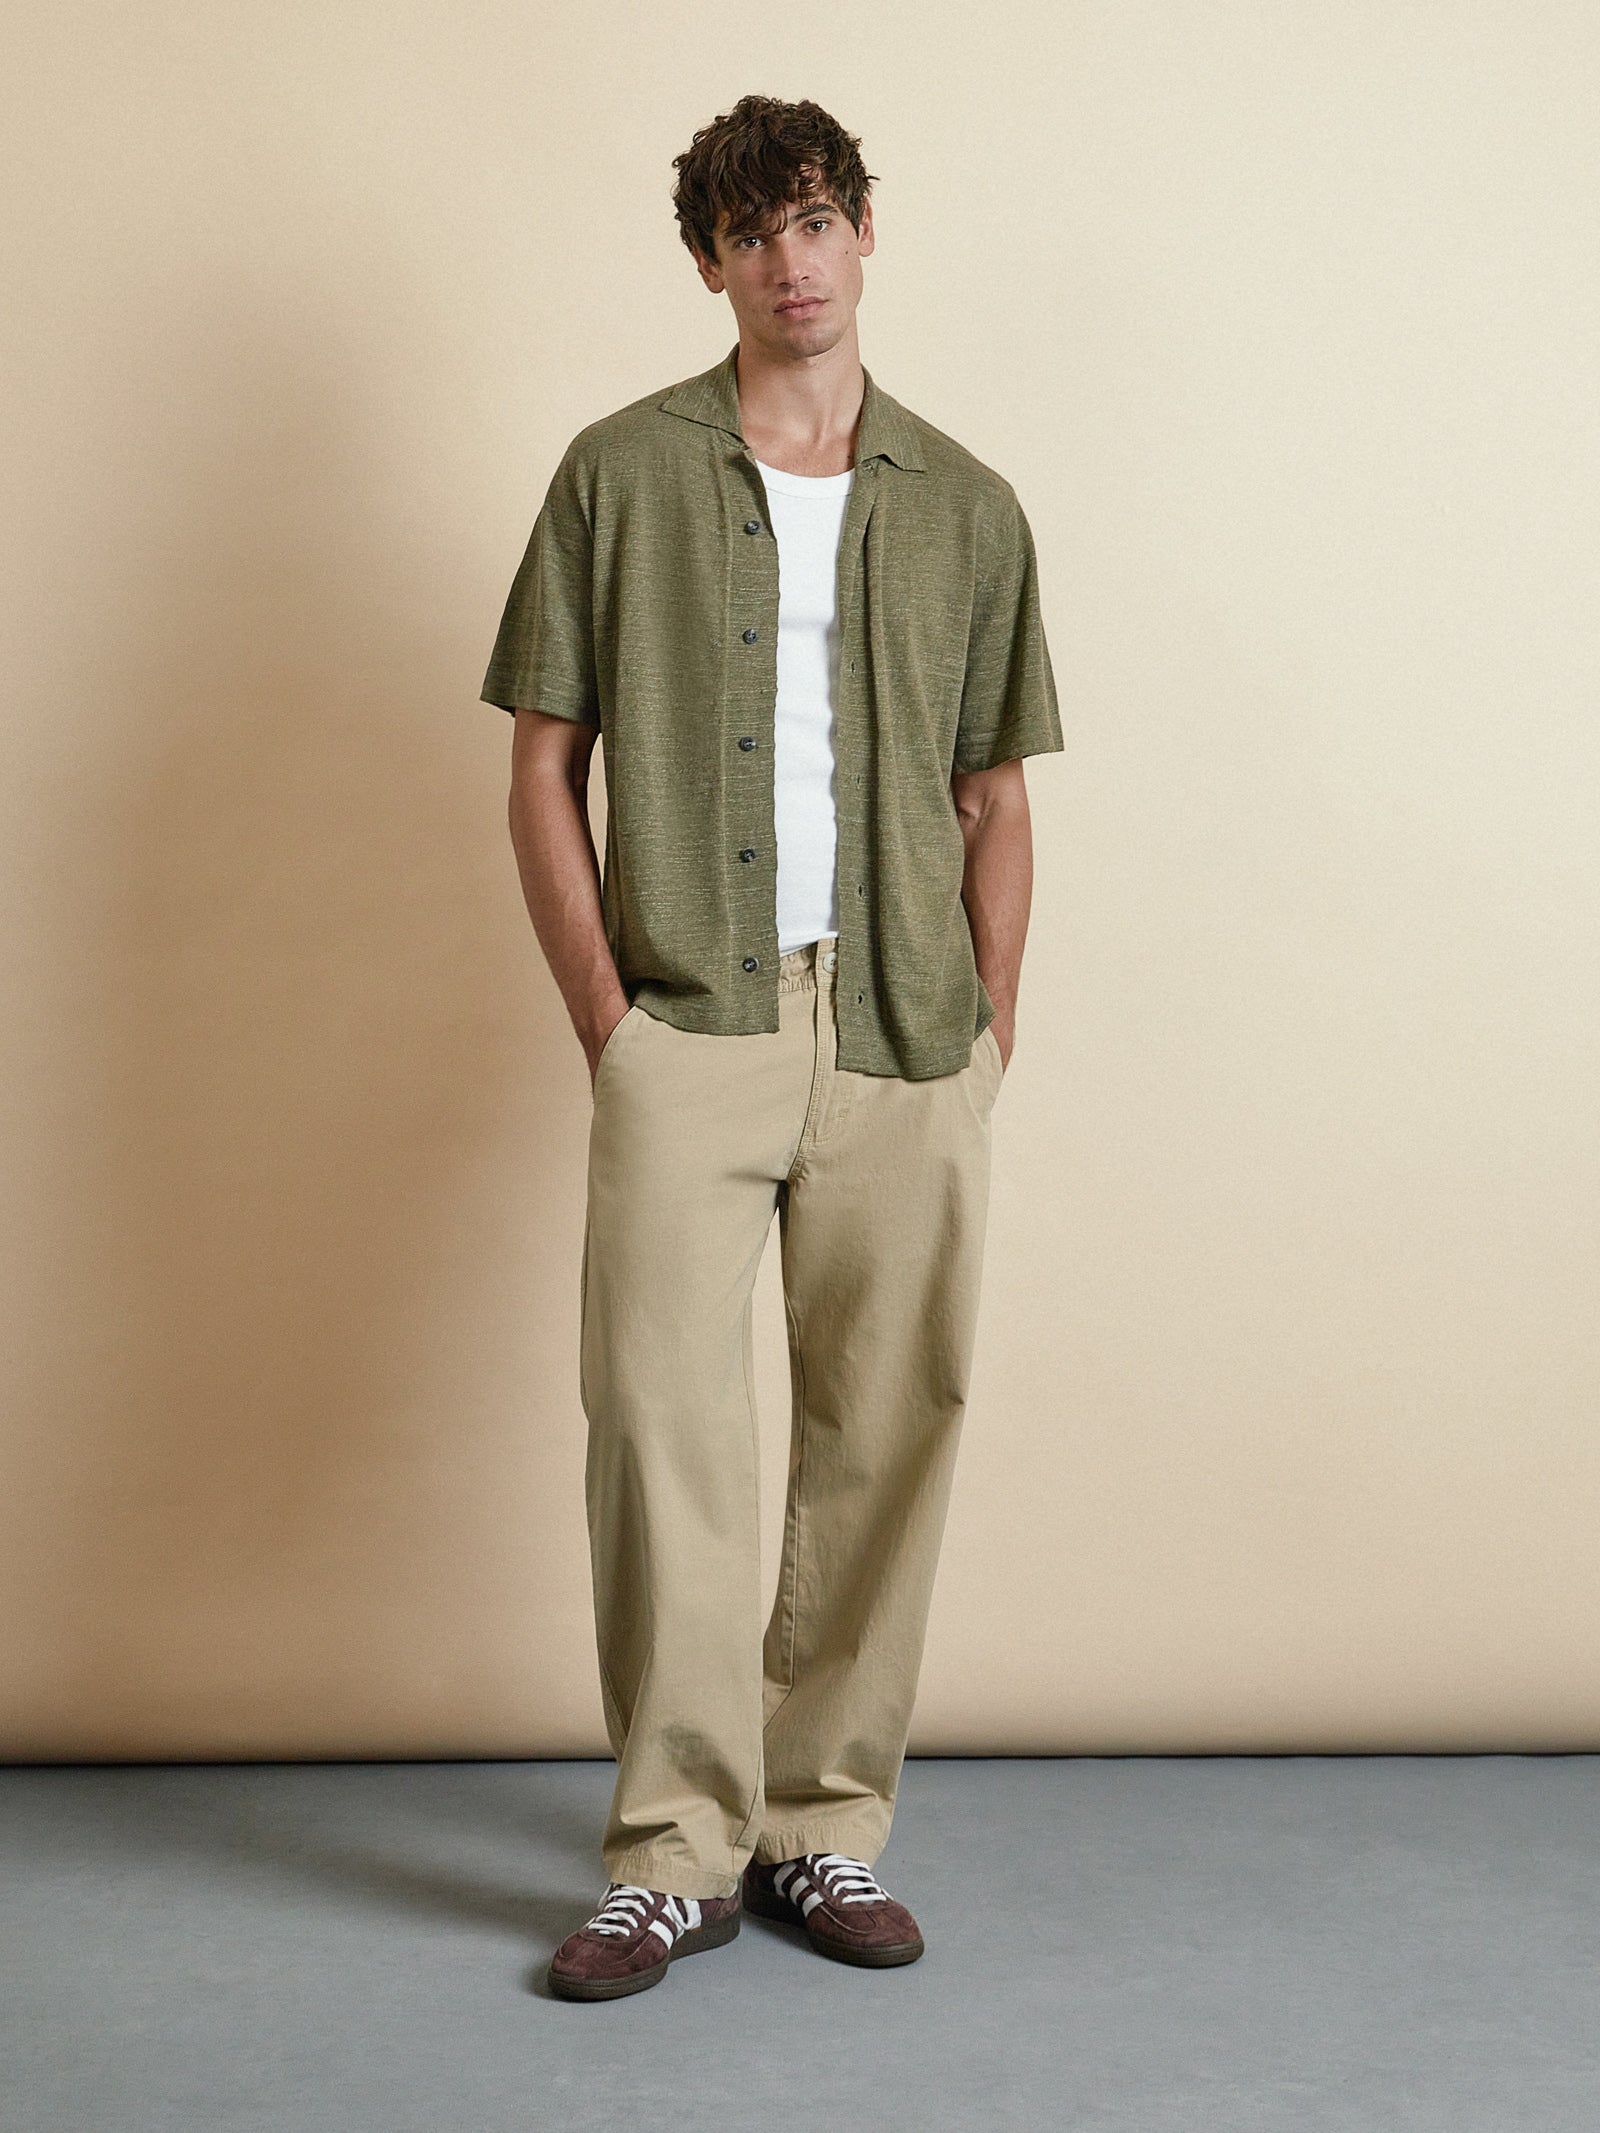 Zanito Knit Shirt in Taupe - Glue Store